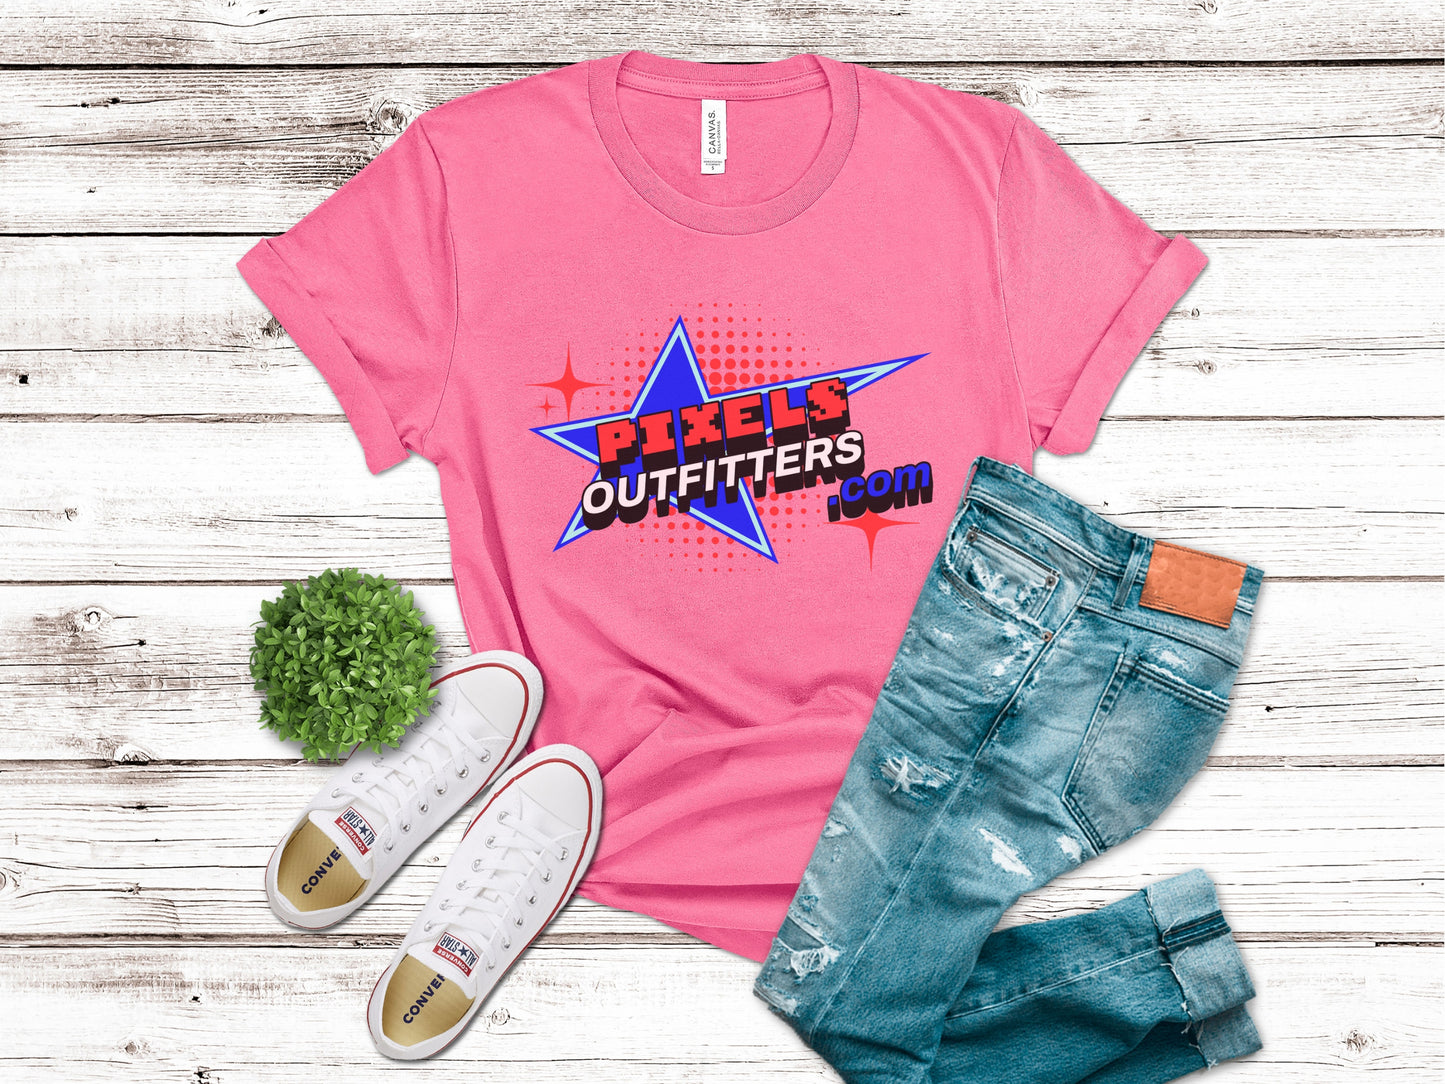 YOU'RE A STAR PIXELS OUTFITTERS